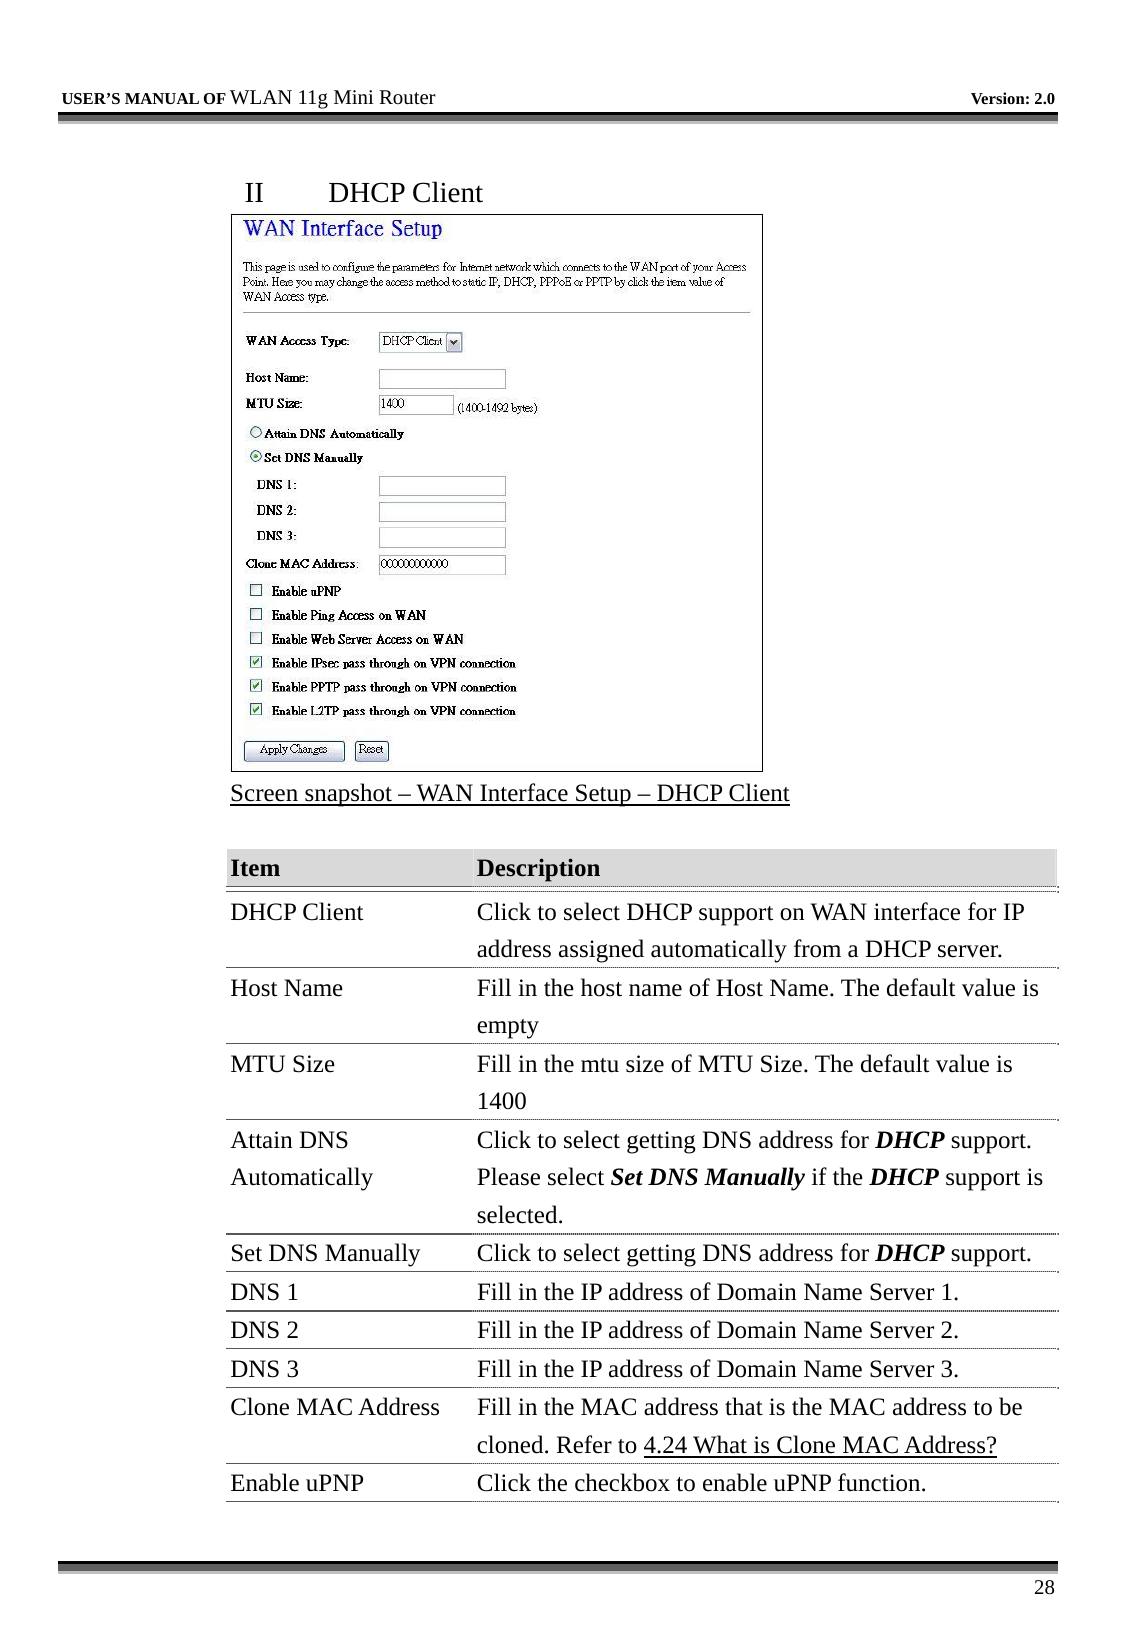   USER’S MANUAL OF WLAN 11g Mini Router   Version: 2.0     28  II  DHCP Client  Screen snapshot – WAN Interface Setup – DHCP Client  Item  Description   DHCP Client  Click to select DHCP support on WAN interface for IP address assigned automatically from a DHCP server. Host Name  Fill in the host name of Host Name. The default value is empty MTU Size  Fill in the mtu size of MTU Size. The default value is 1400 Attain DNS Automatically Click to select getting DNS address for DHCP support. Please select Set DNS Manually if the DHCP support is selected. Set DNS Manually  Click to select getting DNS address for DHCP support. DNS 1  Fill in the IP address of Domain Name Server 1. DNS 2  Fill in the IP address of Domain Name Server 2. DNS 3  Fill in the IP address of Domain Name Server 3. Clone MAC Address  Fill in the MAC address that is the MAC address to be cloned. Refer to 4.24 What is Clone MAC Address? Enable uPNP  Click the checkbox to enable uPNP function. 